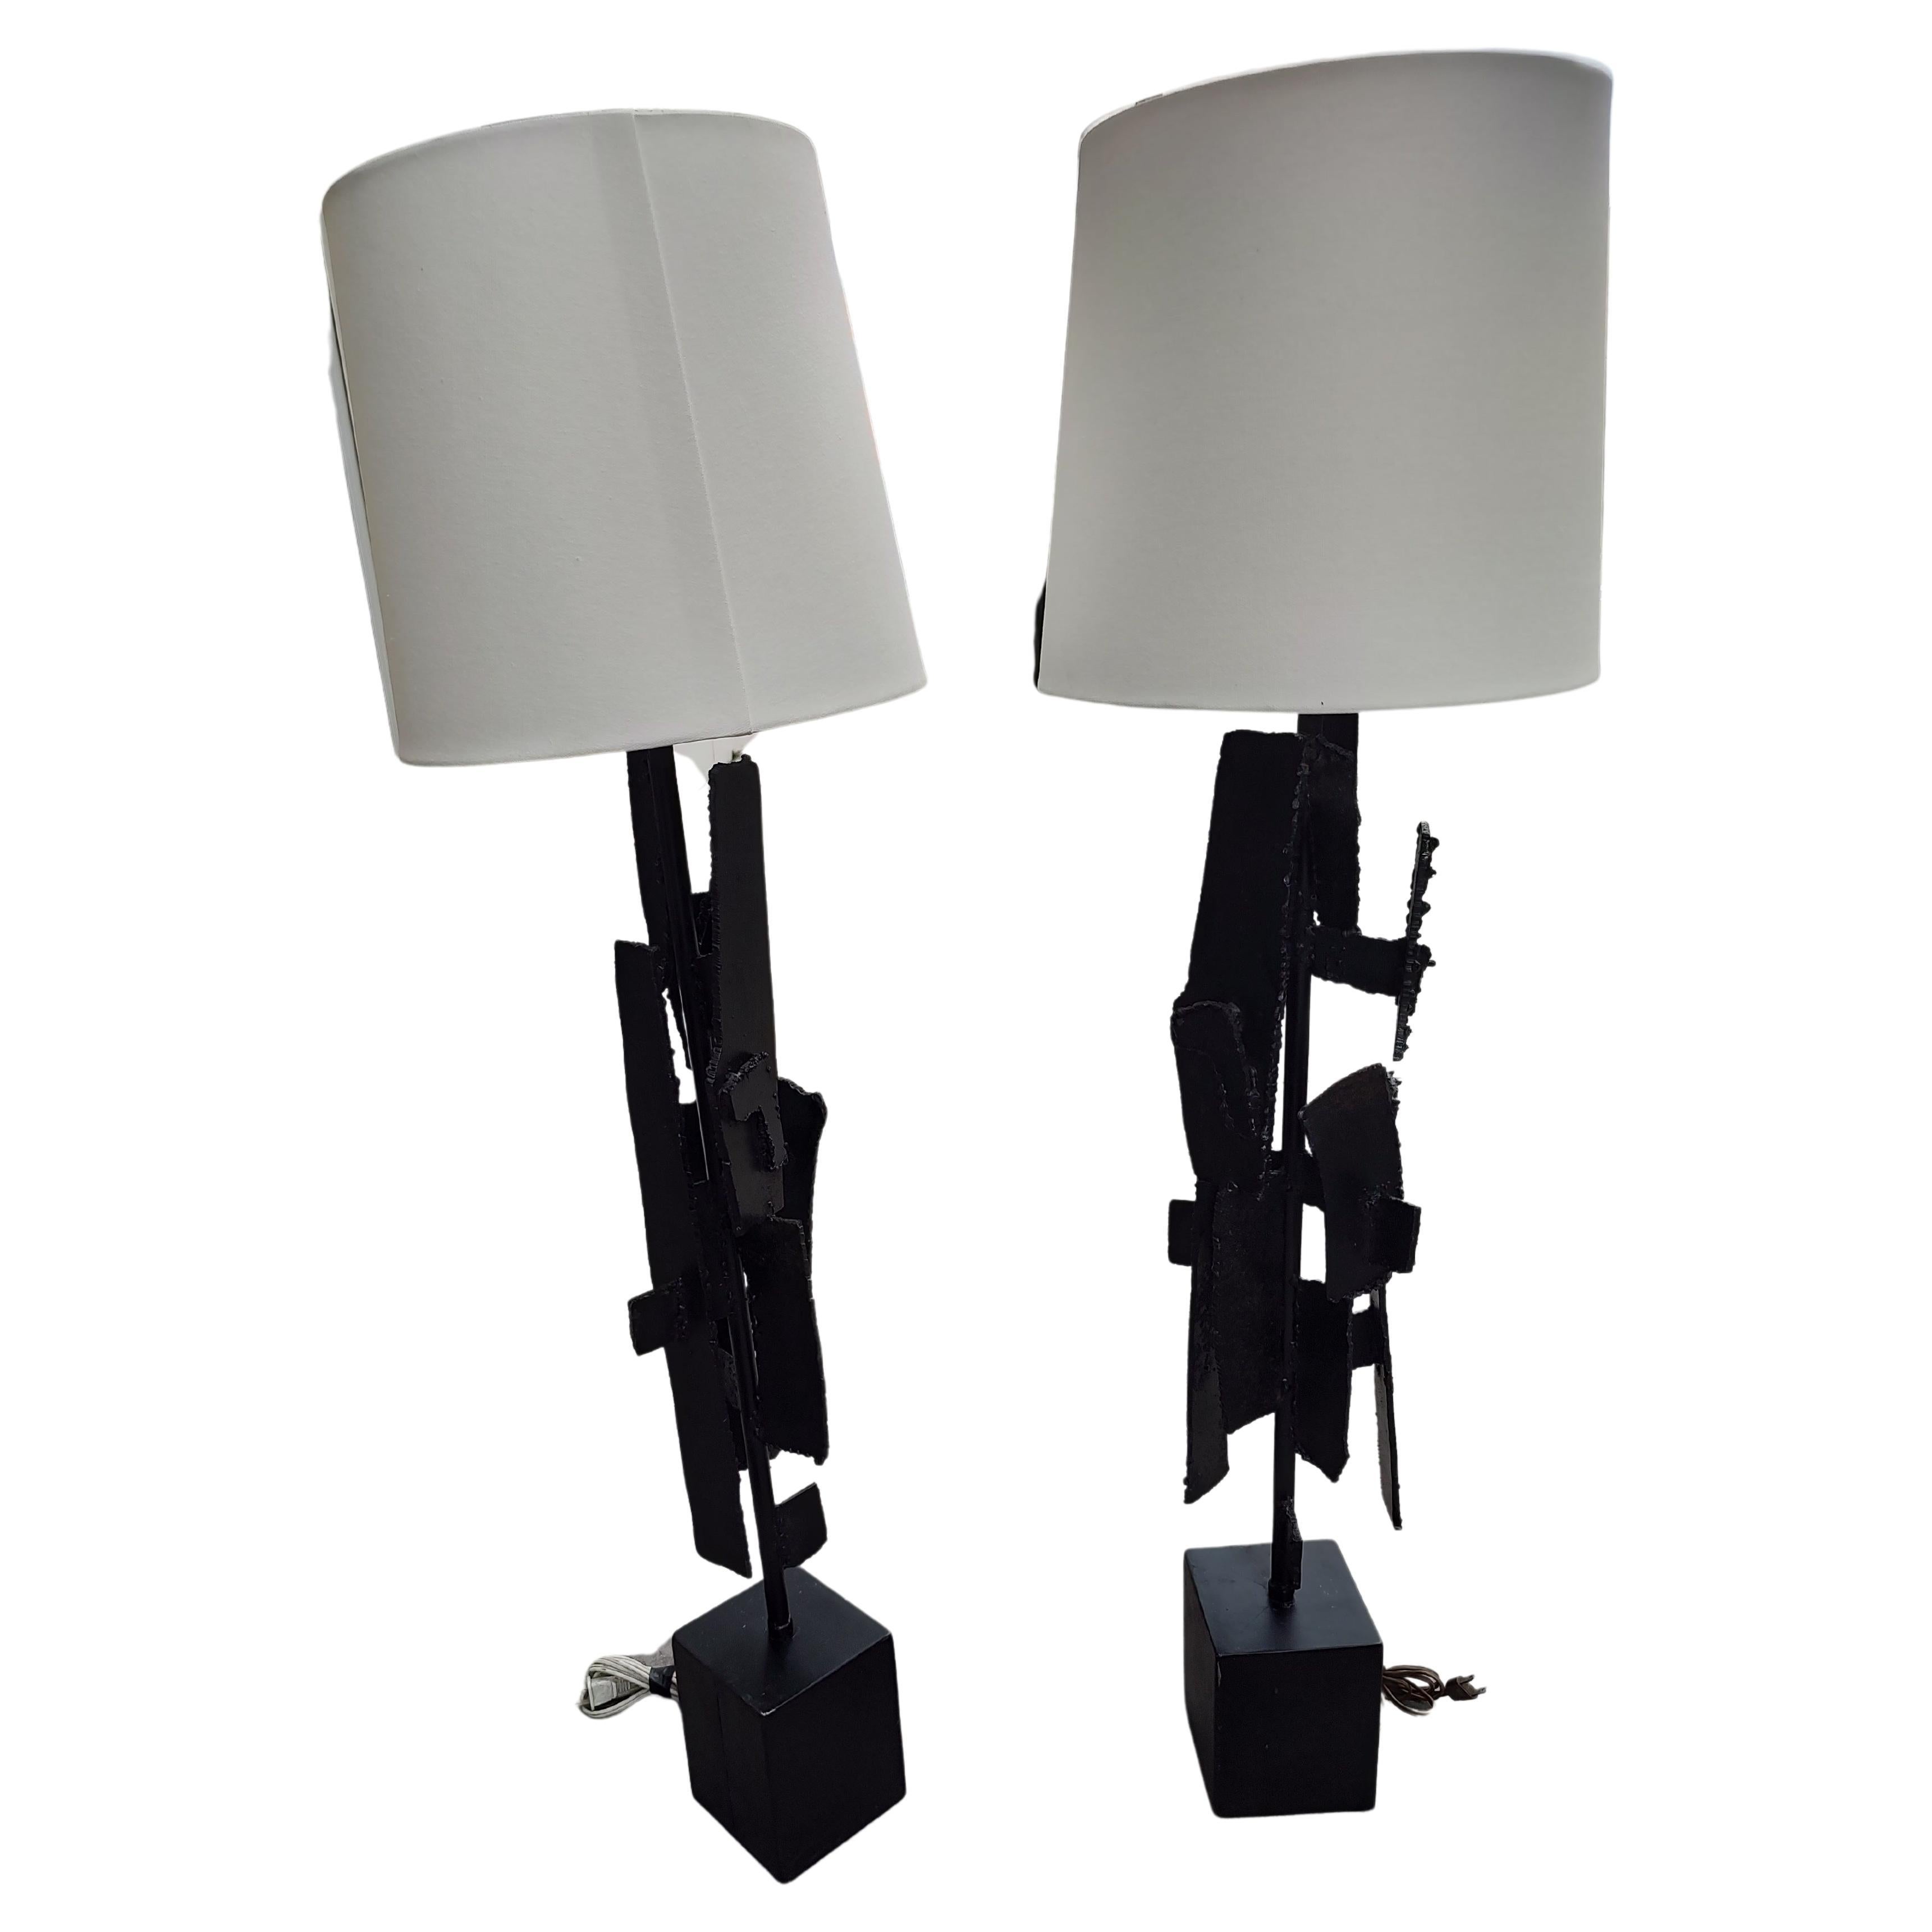 Pair of Mid Century Modern Sculptural Brutalist Torch Cut Steel Table Lamps 